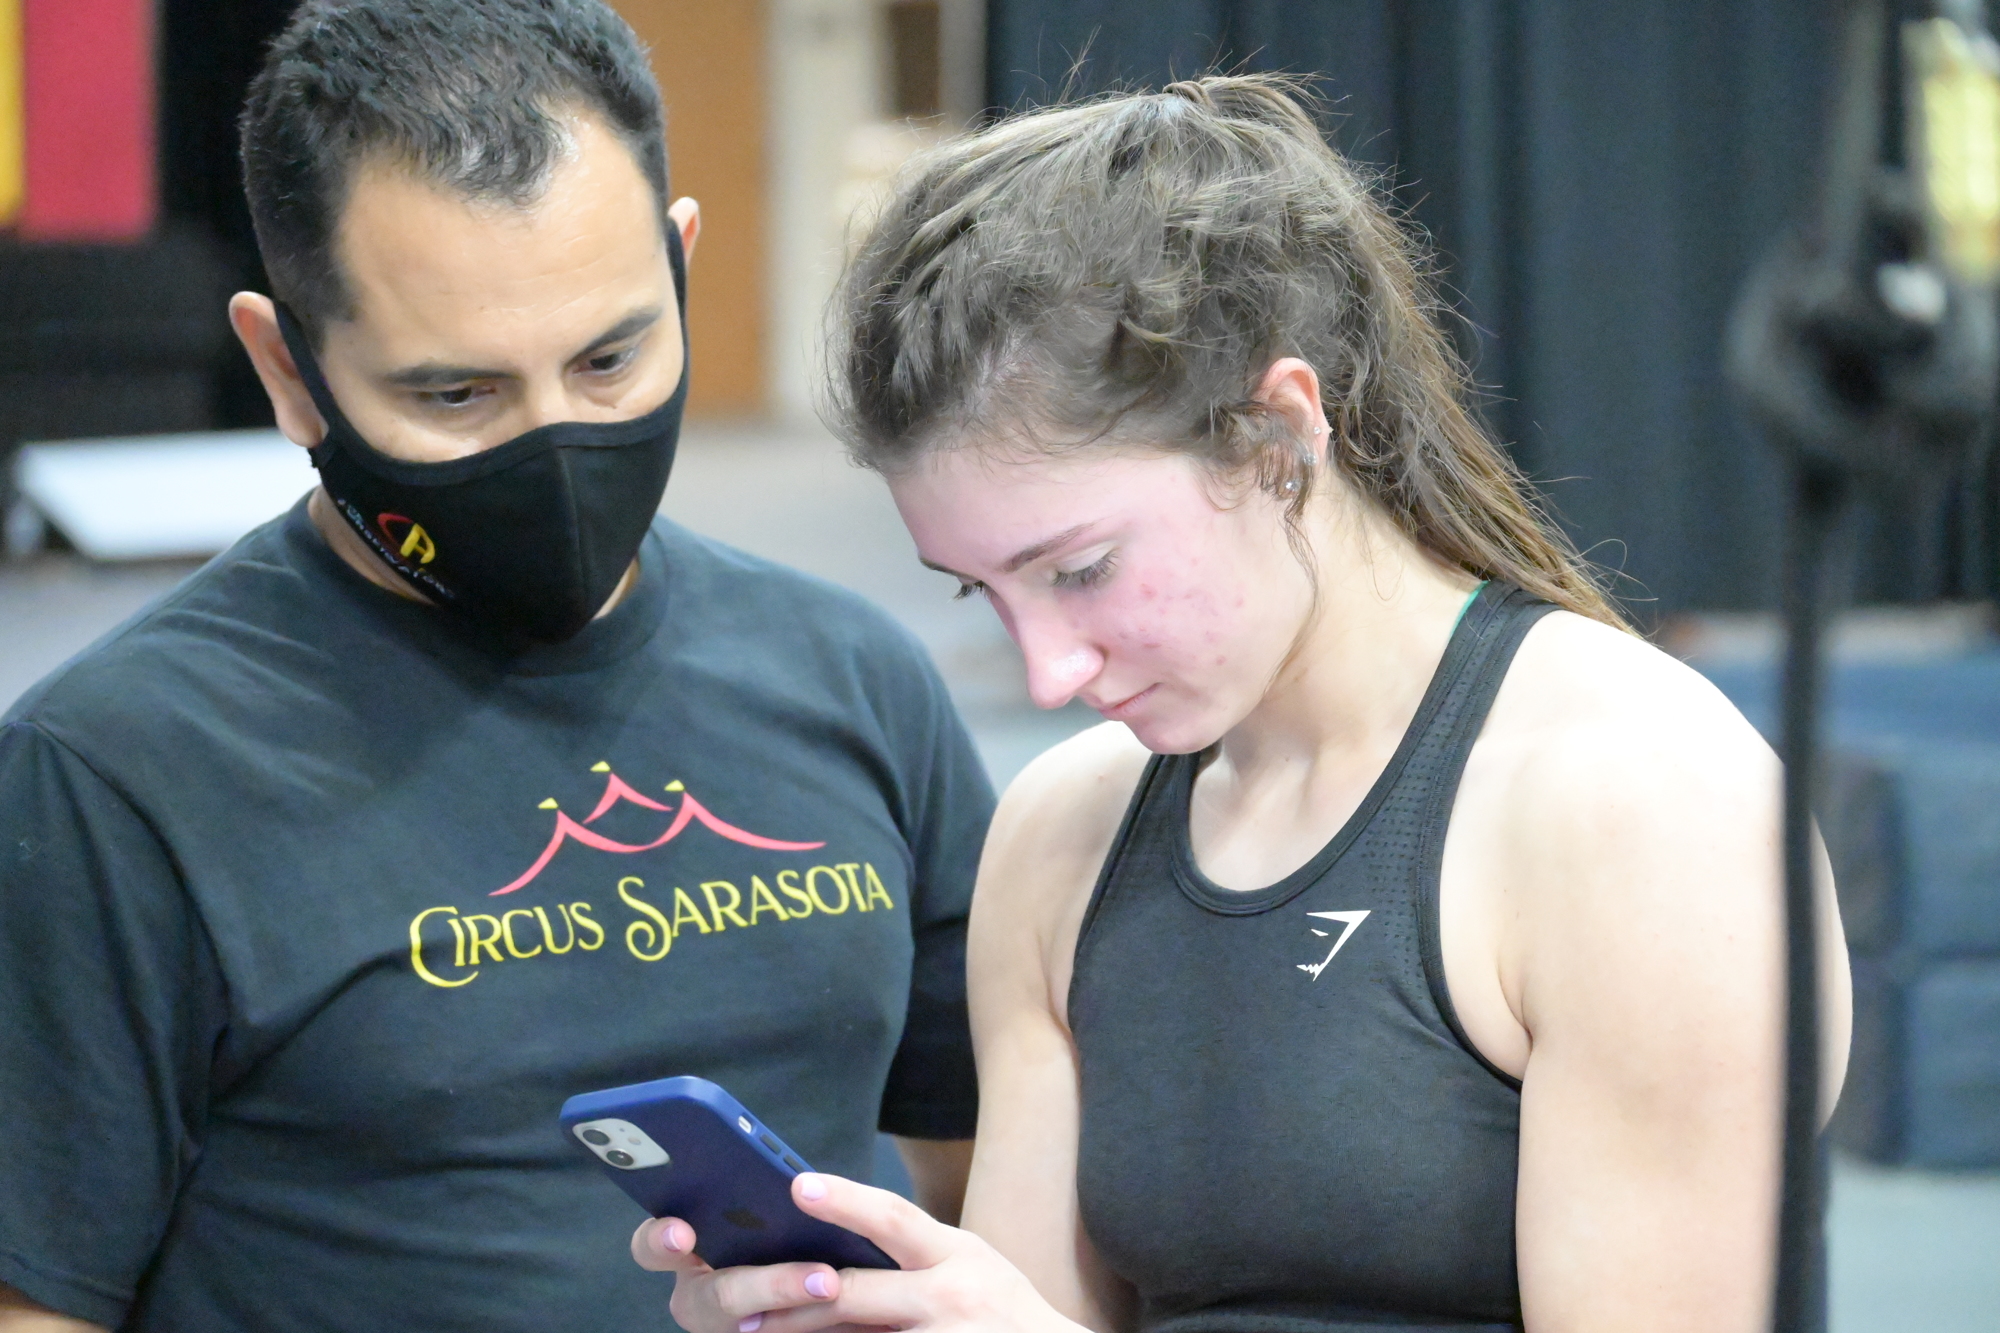 Coach Miguel Vargas and student Lila Watkins share a quiet moment during rehearsal. (Photo: Spencer Fordin)